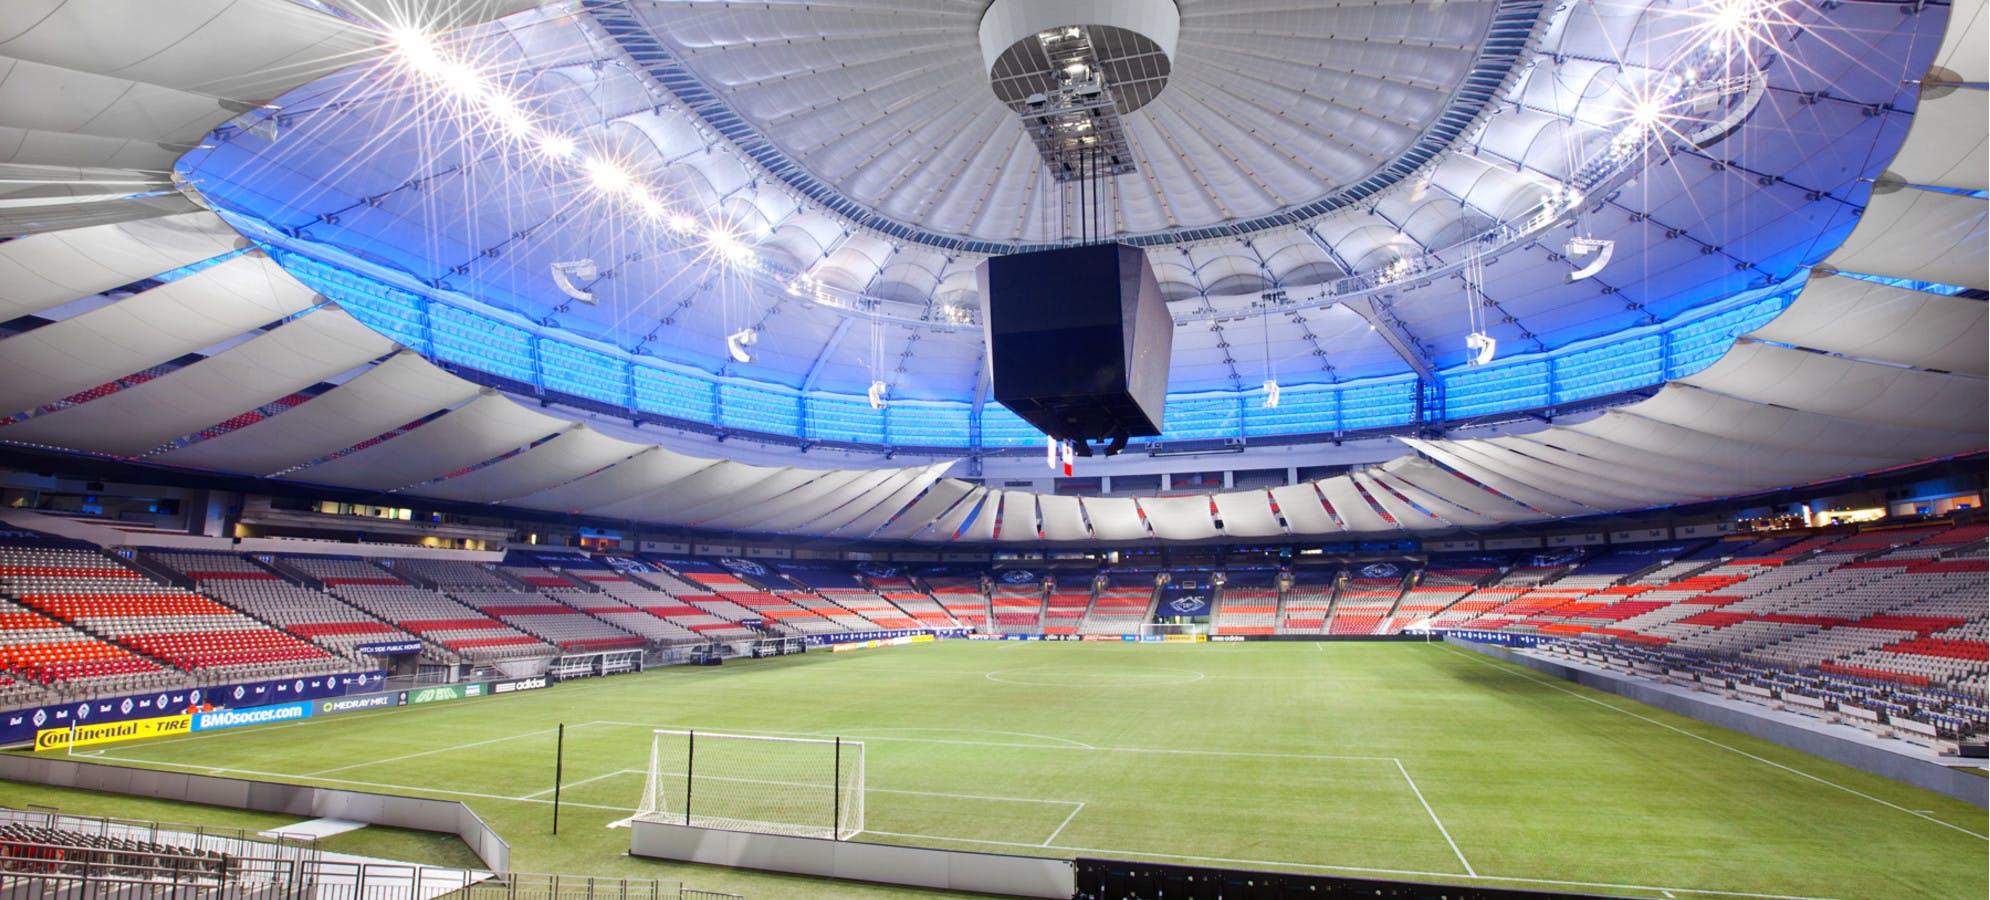 BC Place Named One of “Top 100 Best Soccer Stadiums in the World”! BC